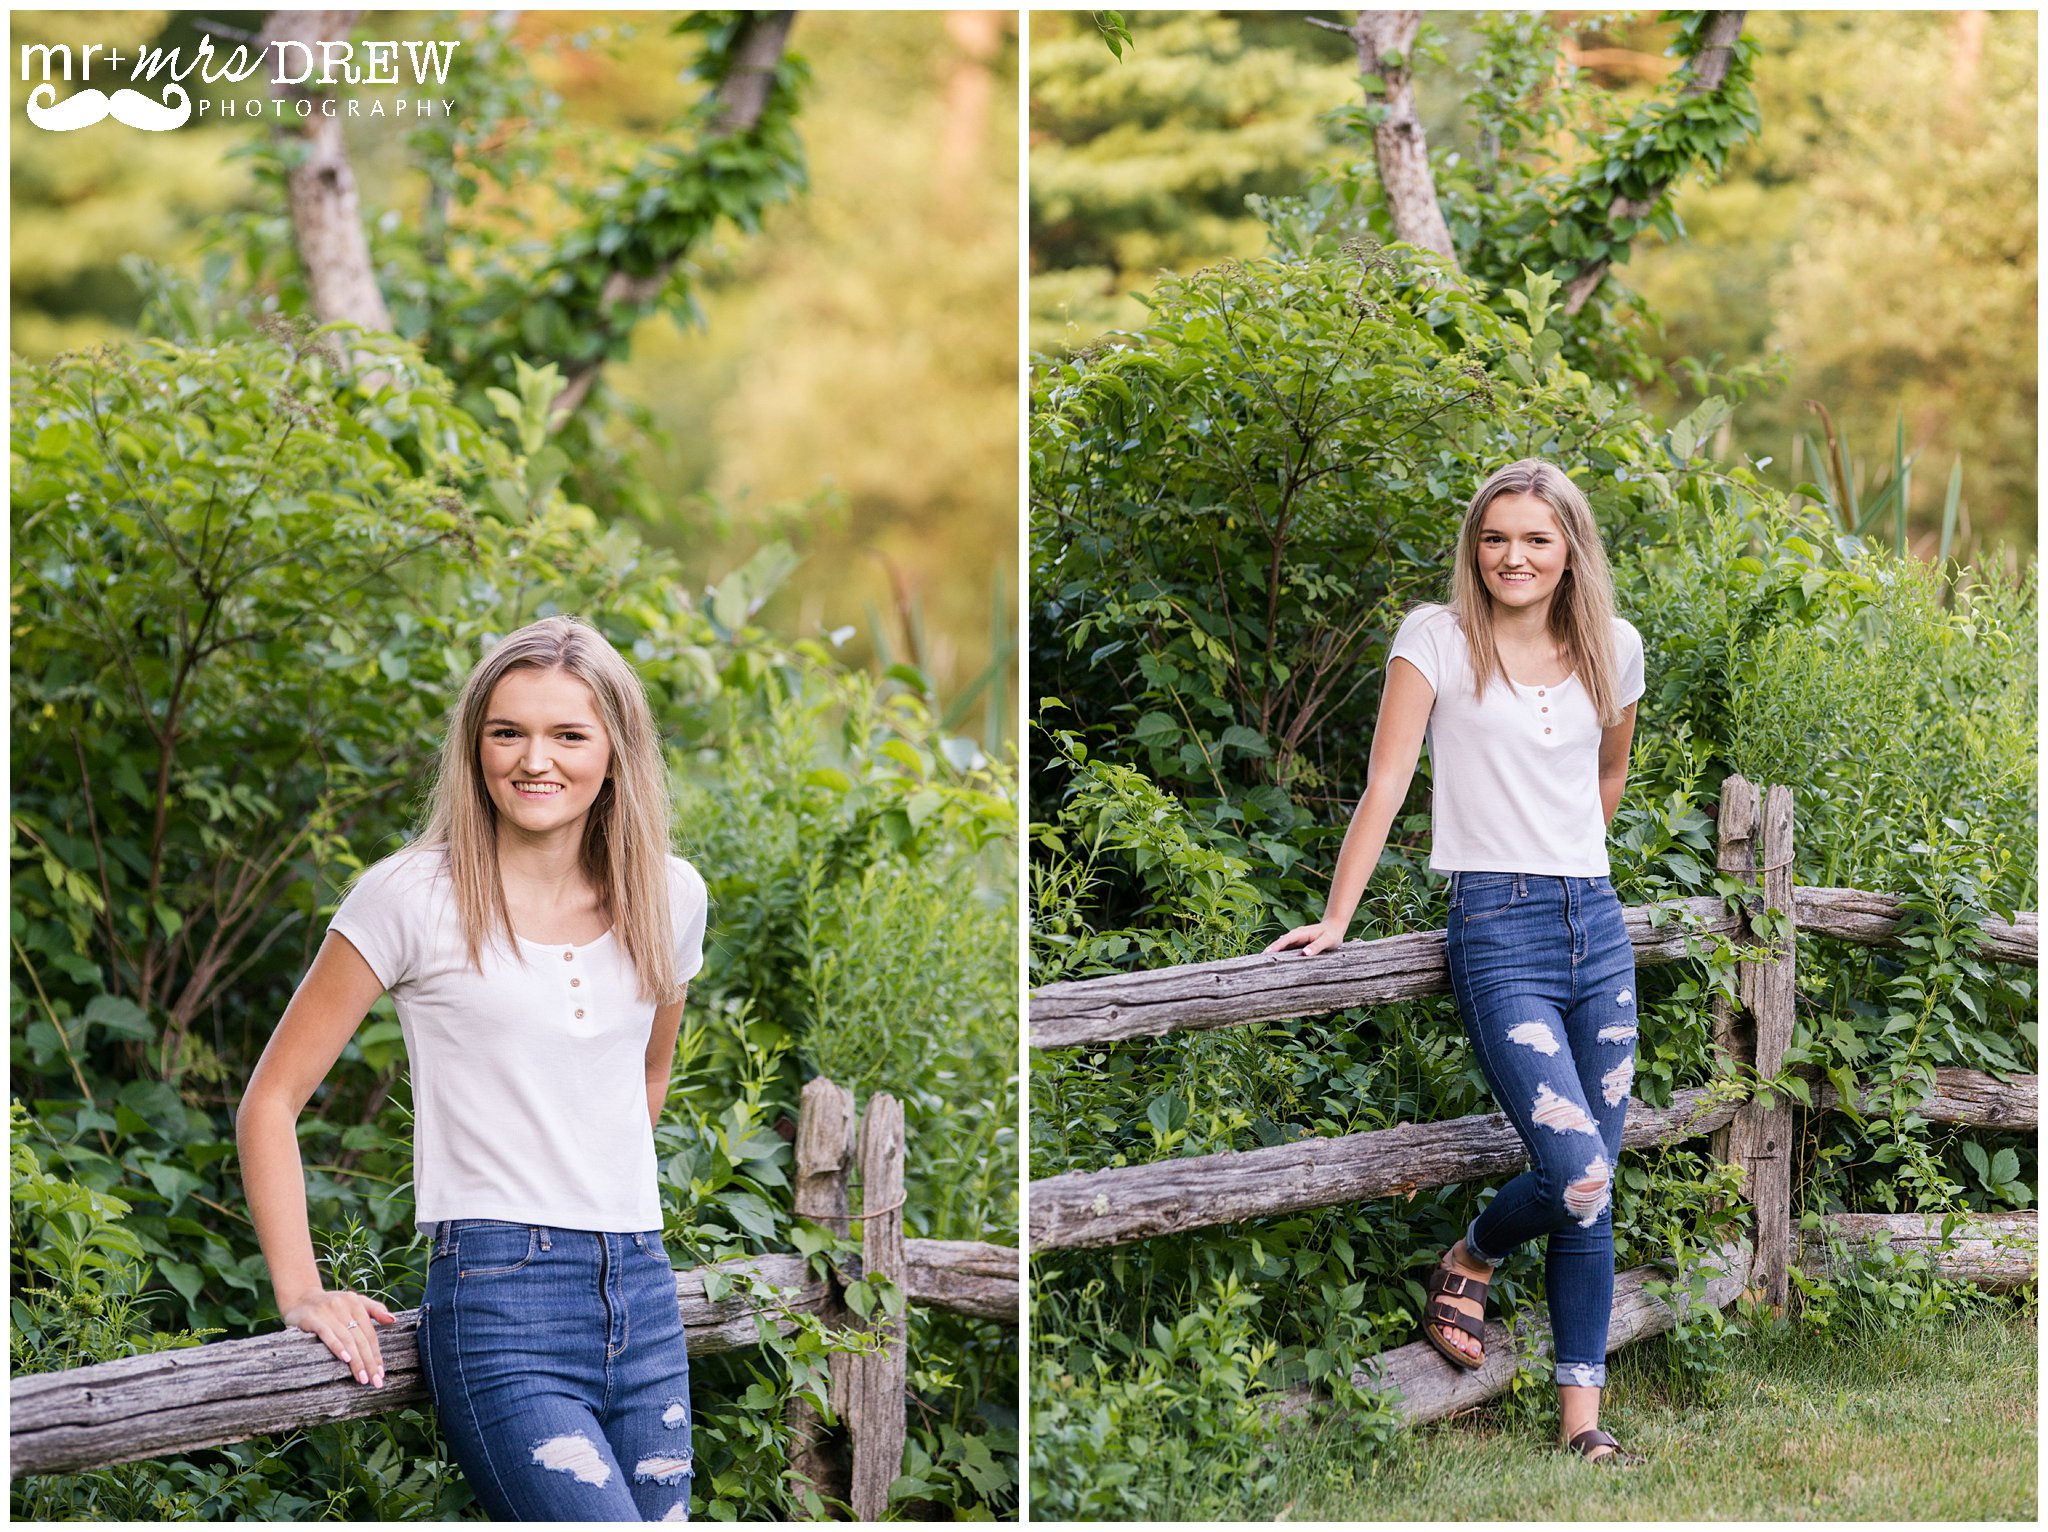 Senior Portrait of girl in white t-shirt and ripped jeans leaning on wooden fence. 